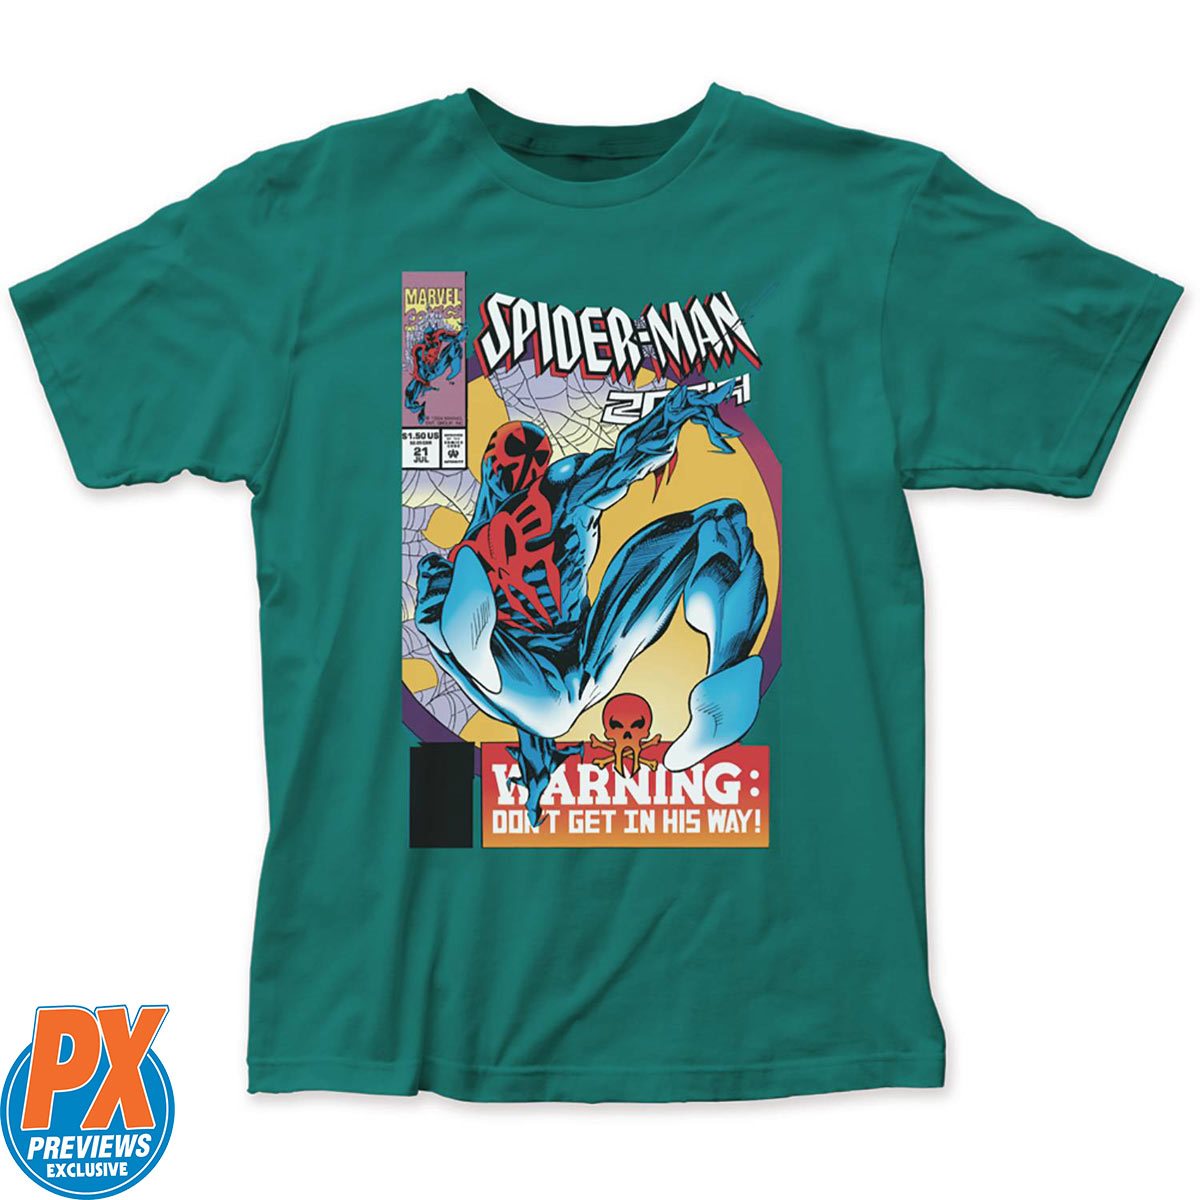 Marvel Spider-Man 2099 Don't Get In His Way Teal T-Shirt - Previews ...